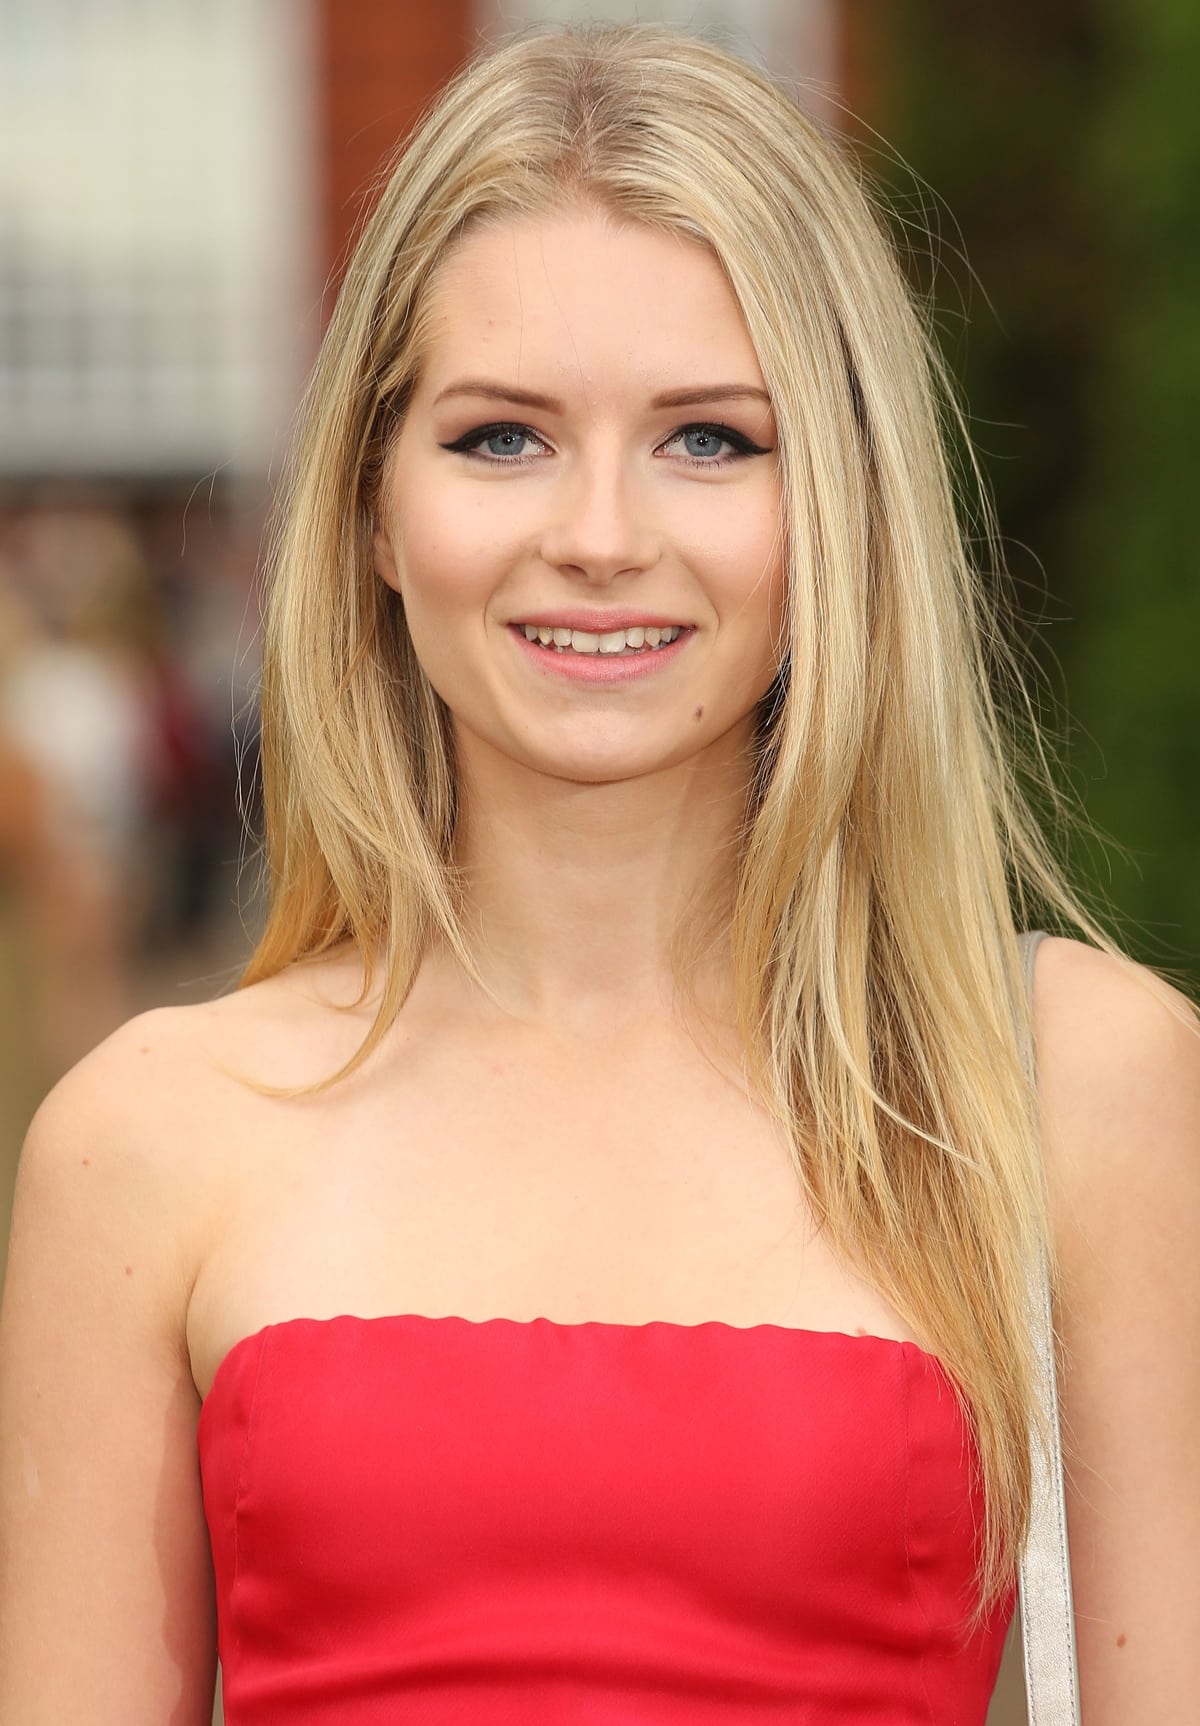 The then 17-year-old Lottie Moss at The Ralph Lauren & Vogue Wimbledon Summer Cocktail Party